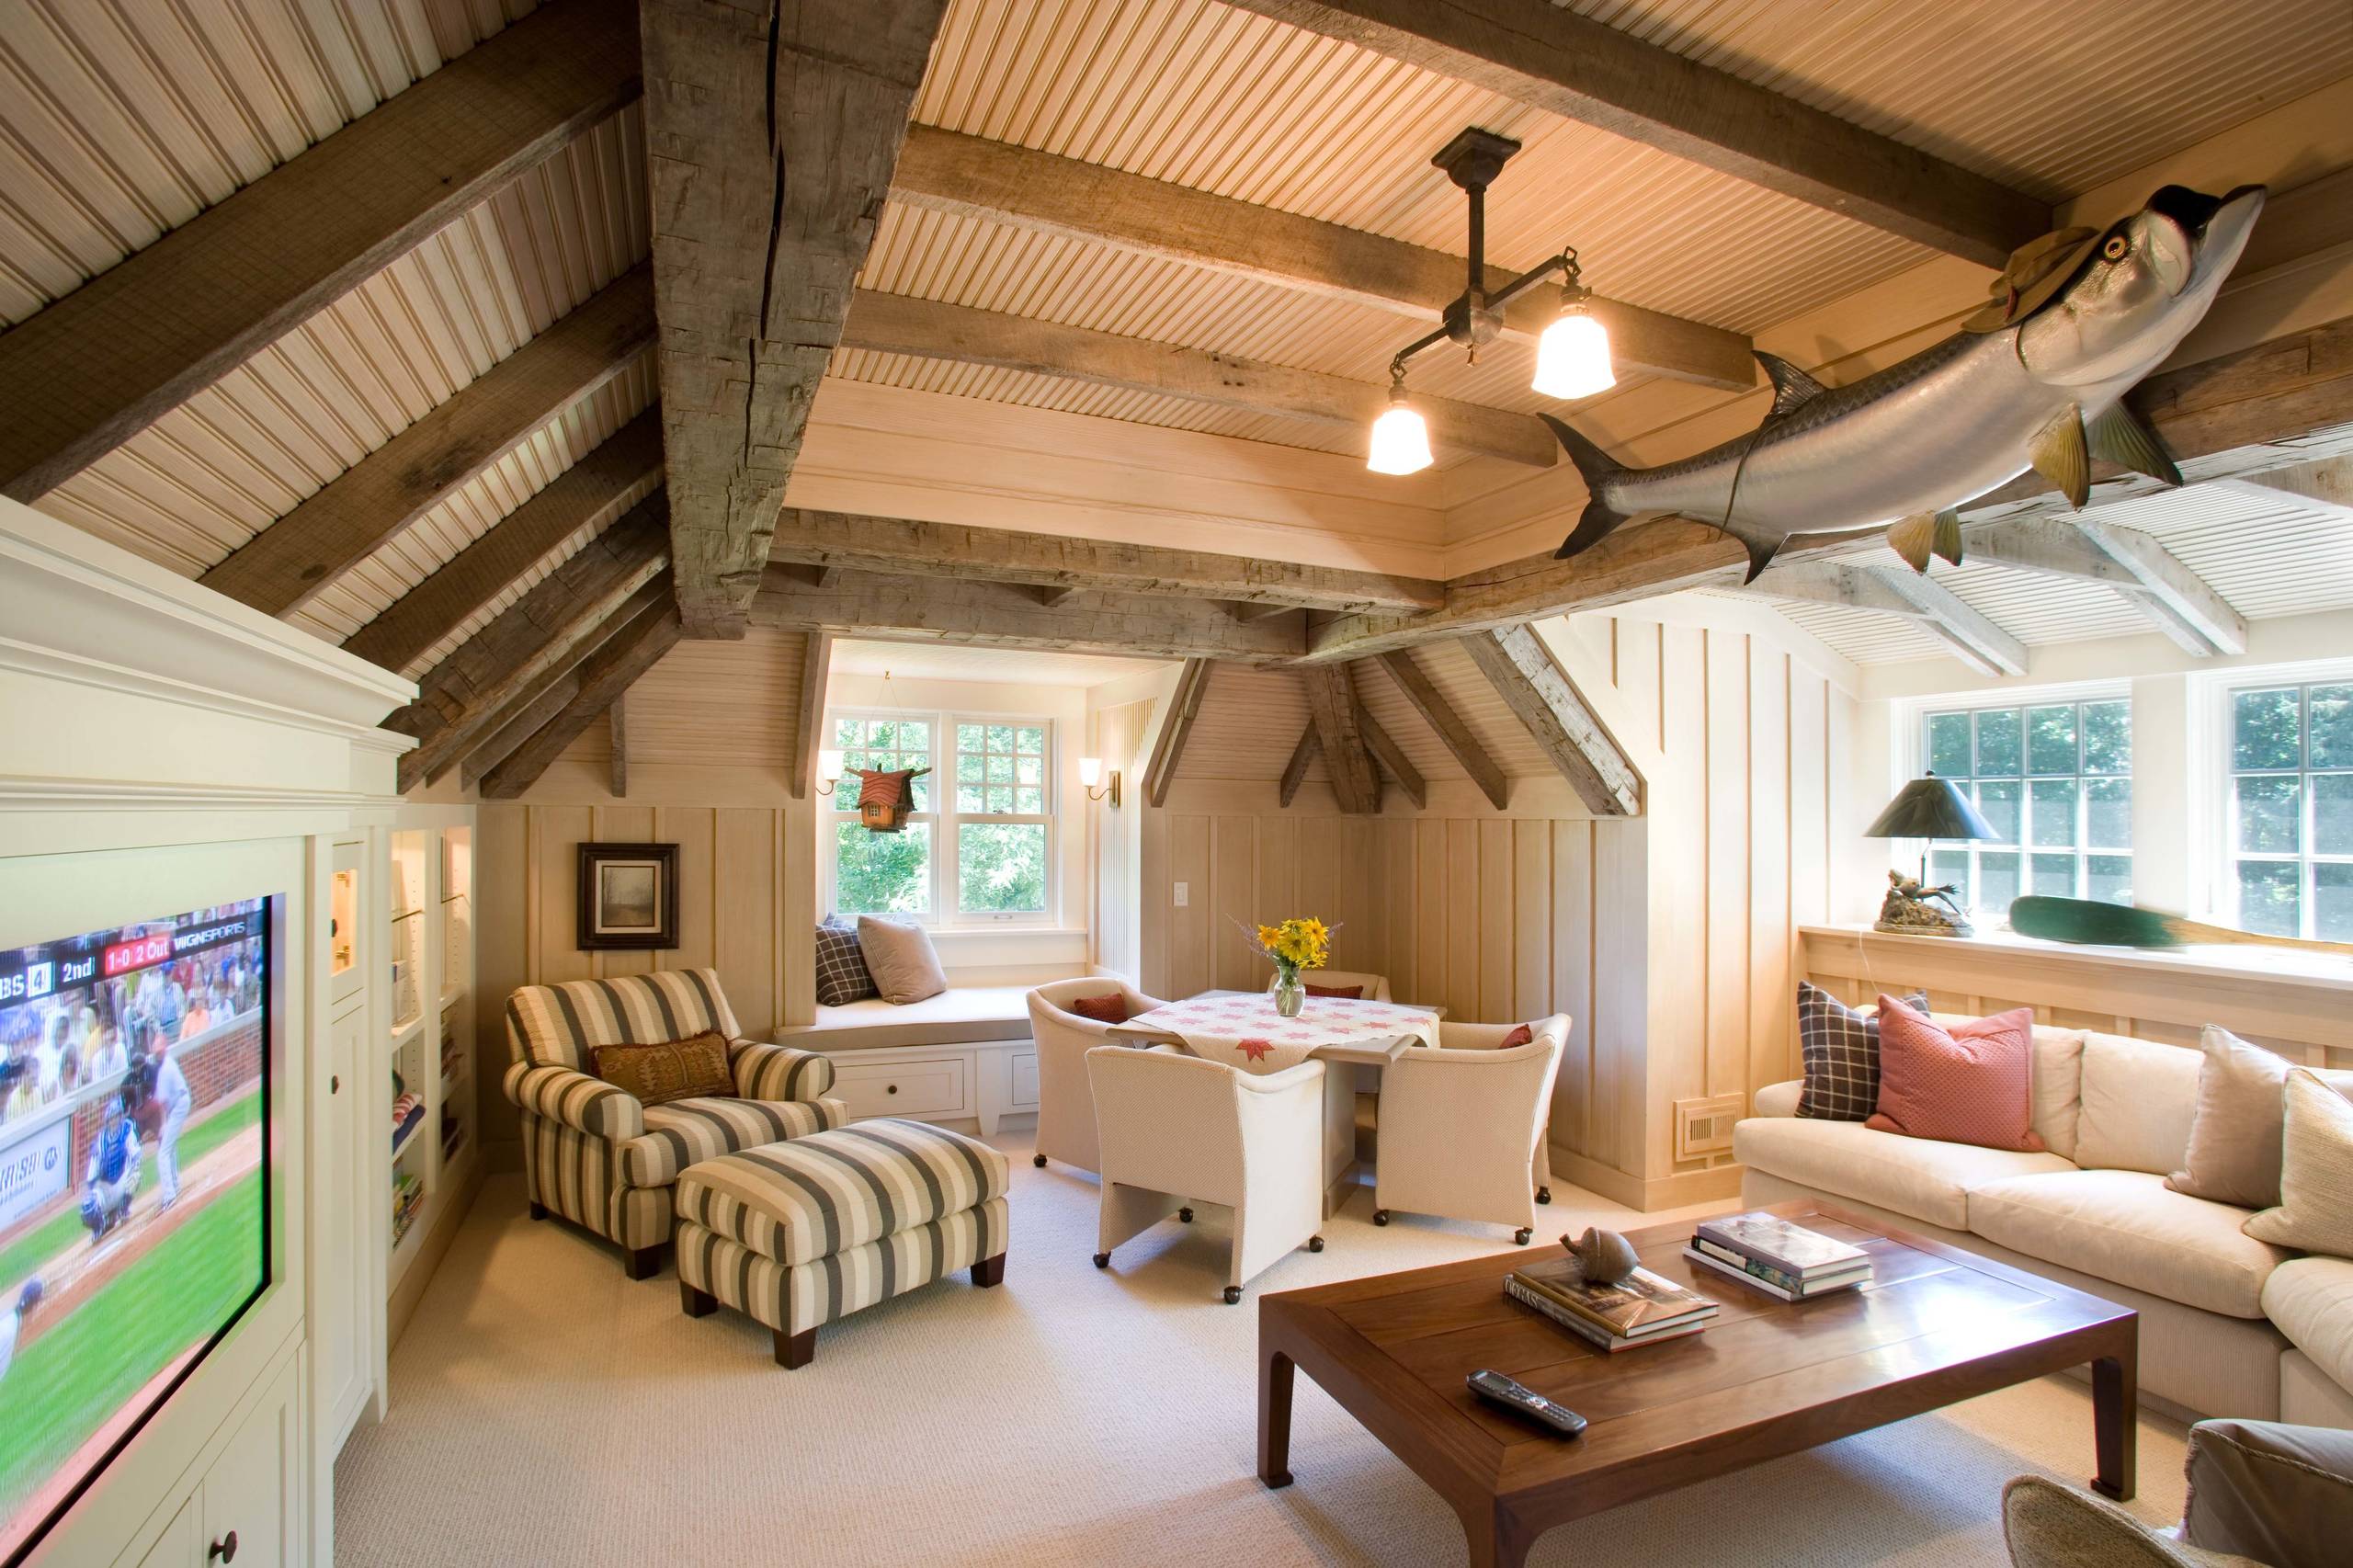 Board And Batten Ceiling Houzz